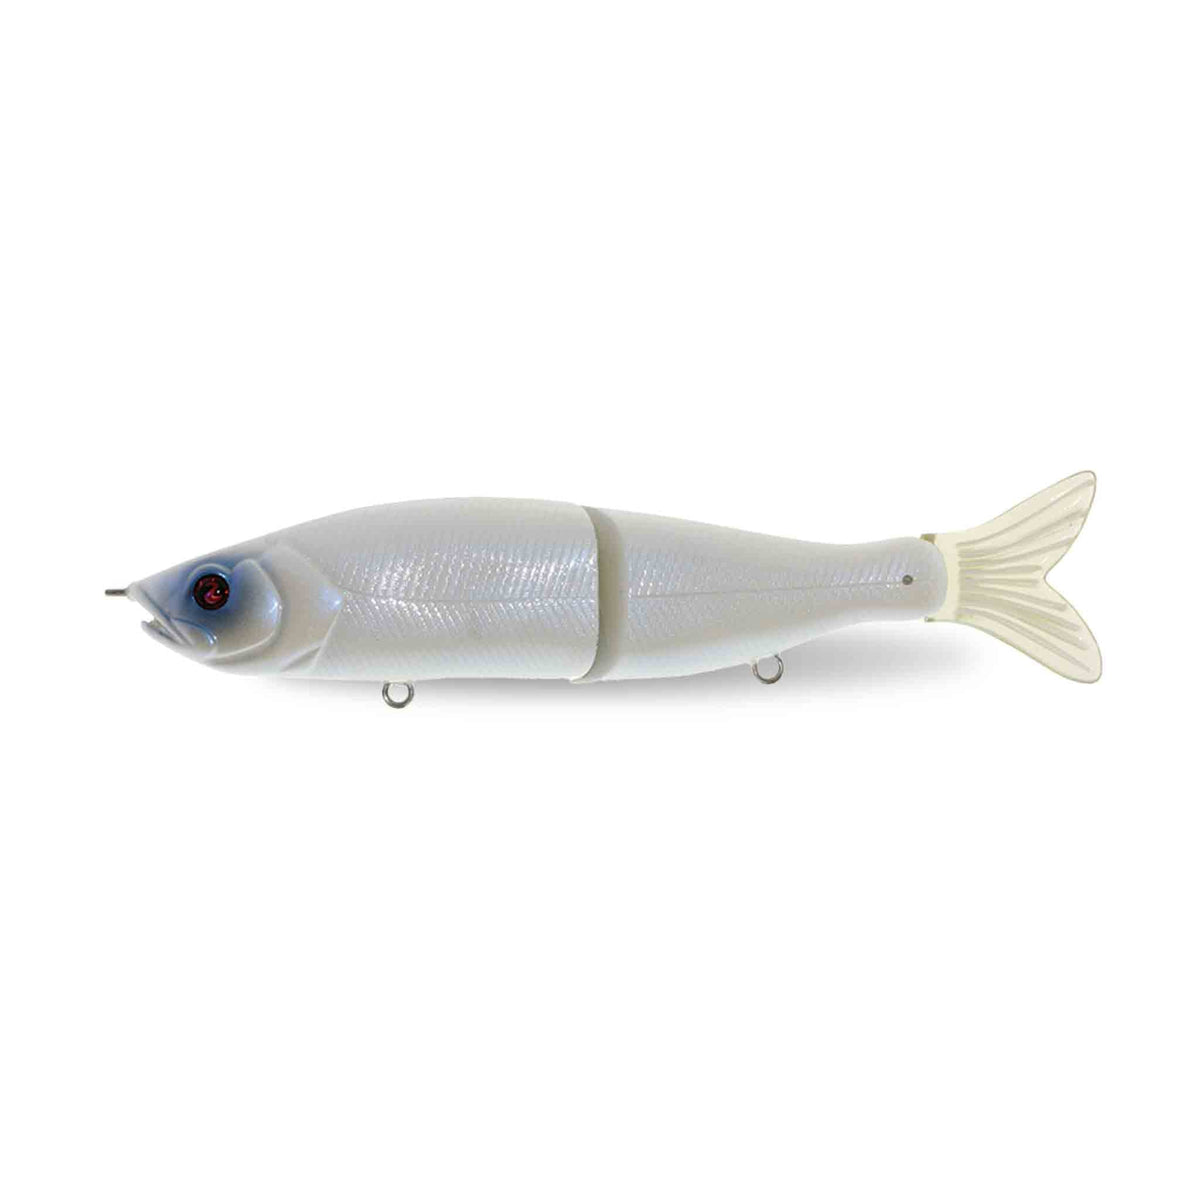 View of Jerk-Glide_Baits River2Sea S-Waver 200S 8" Glide Bait Powder available at EZOKO Pike and Musky Shop